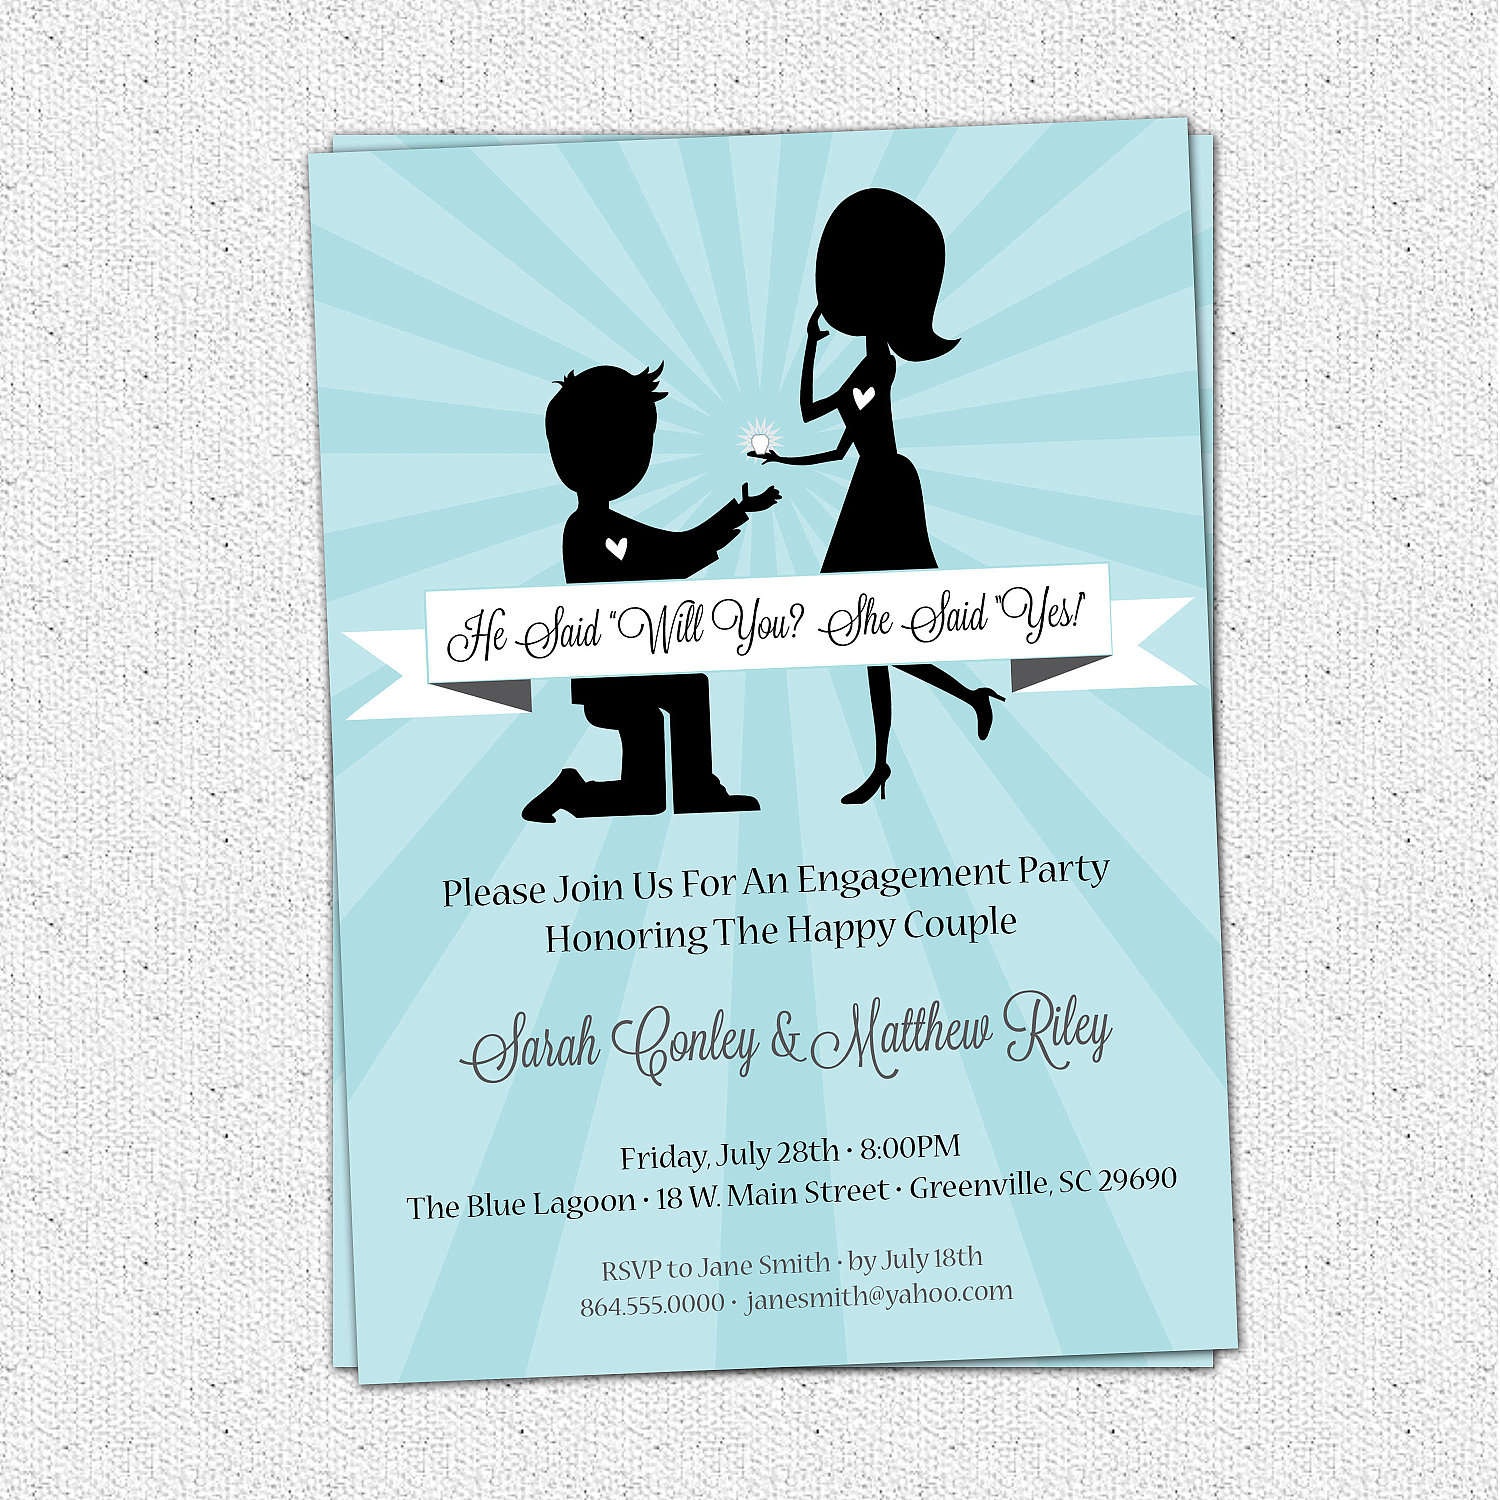 010 Engagement Party Invitations Templates Stunning Cloveranddot - Free Printable Engagement Party Invitations